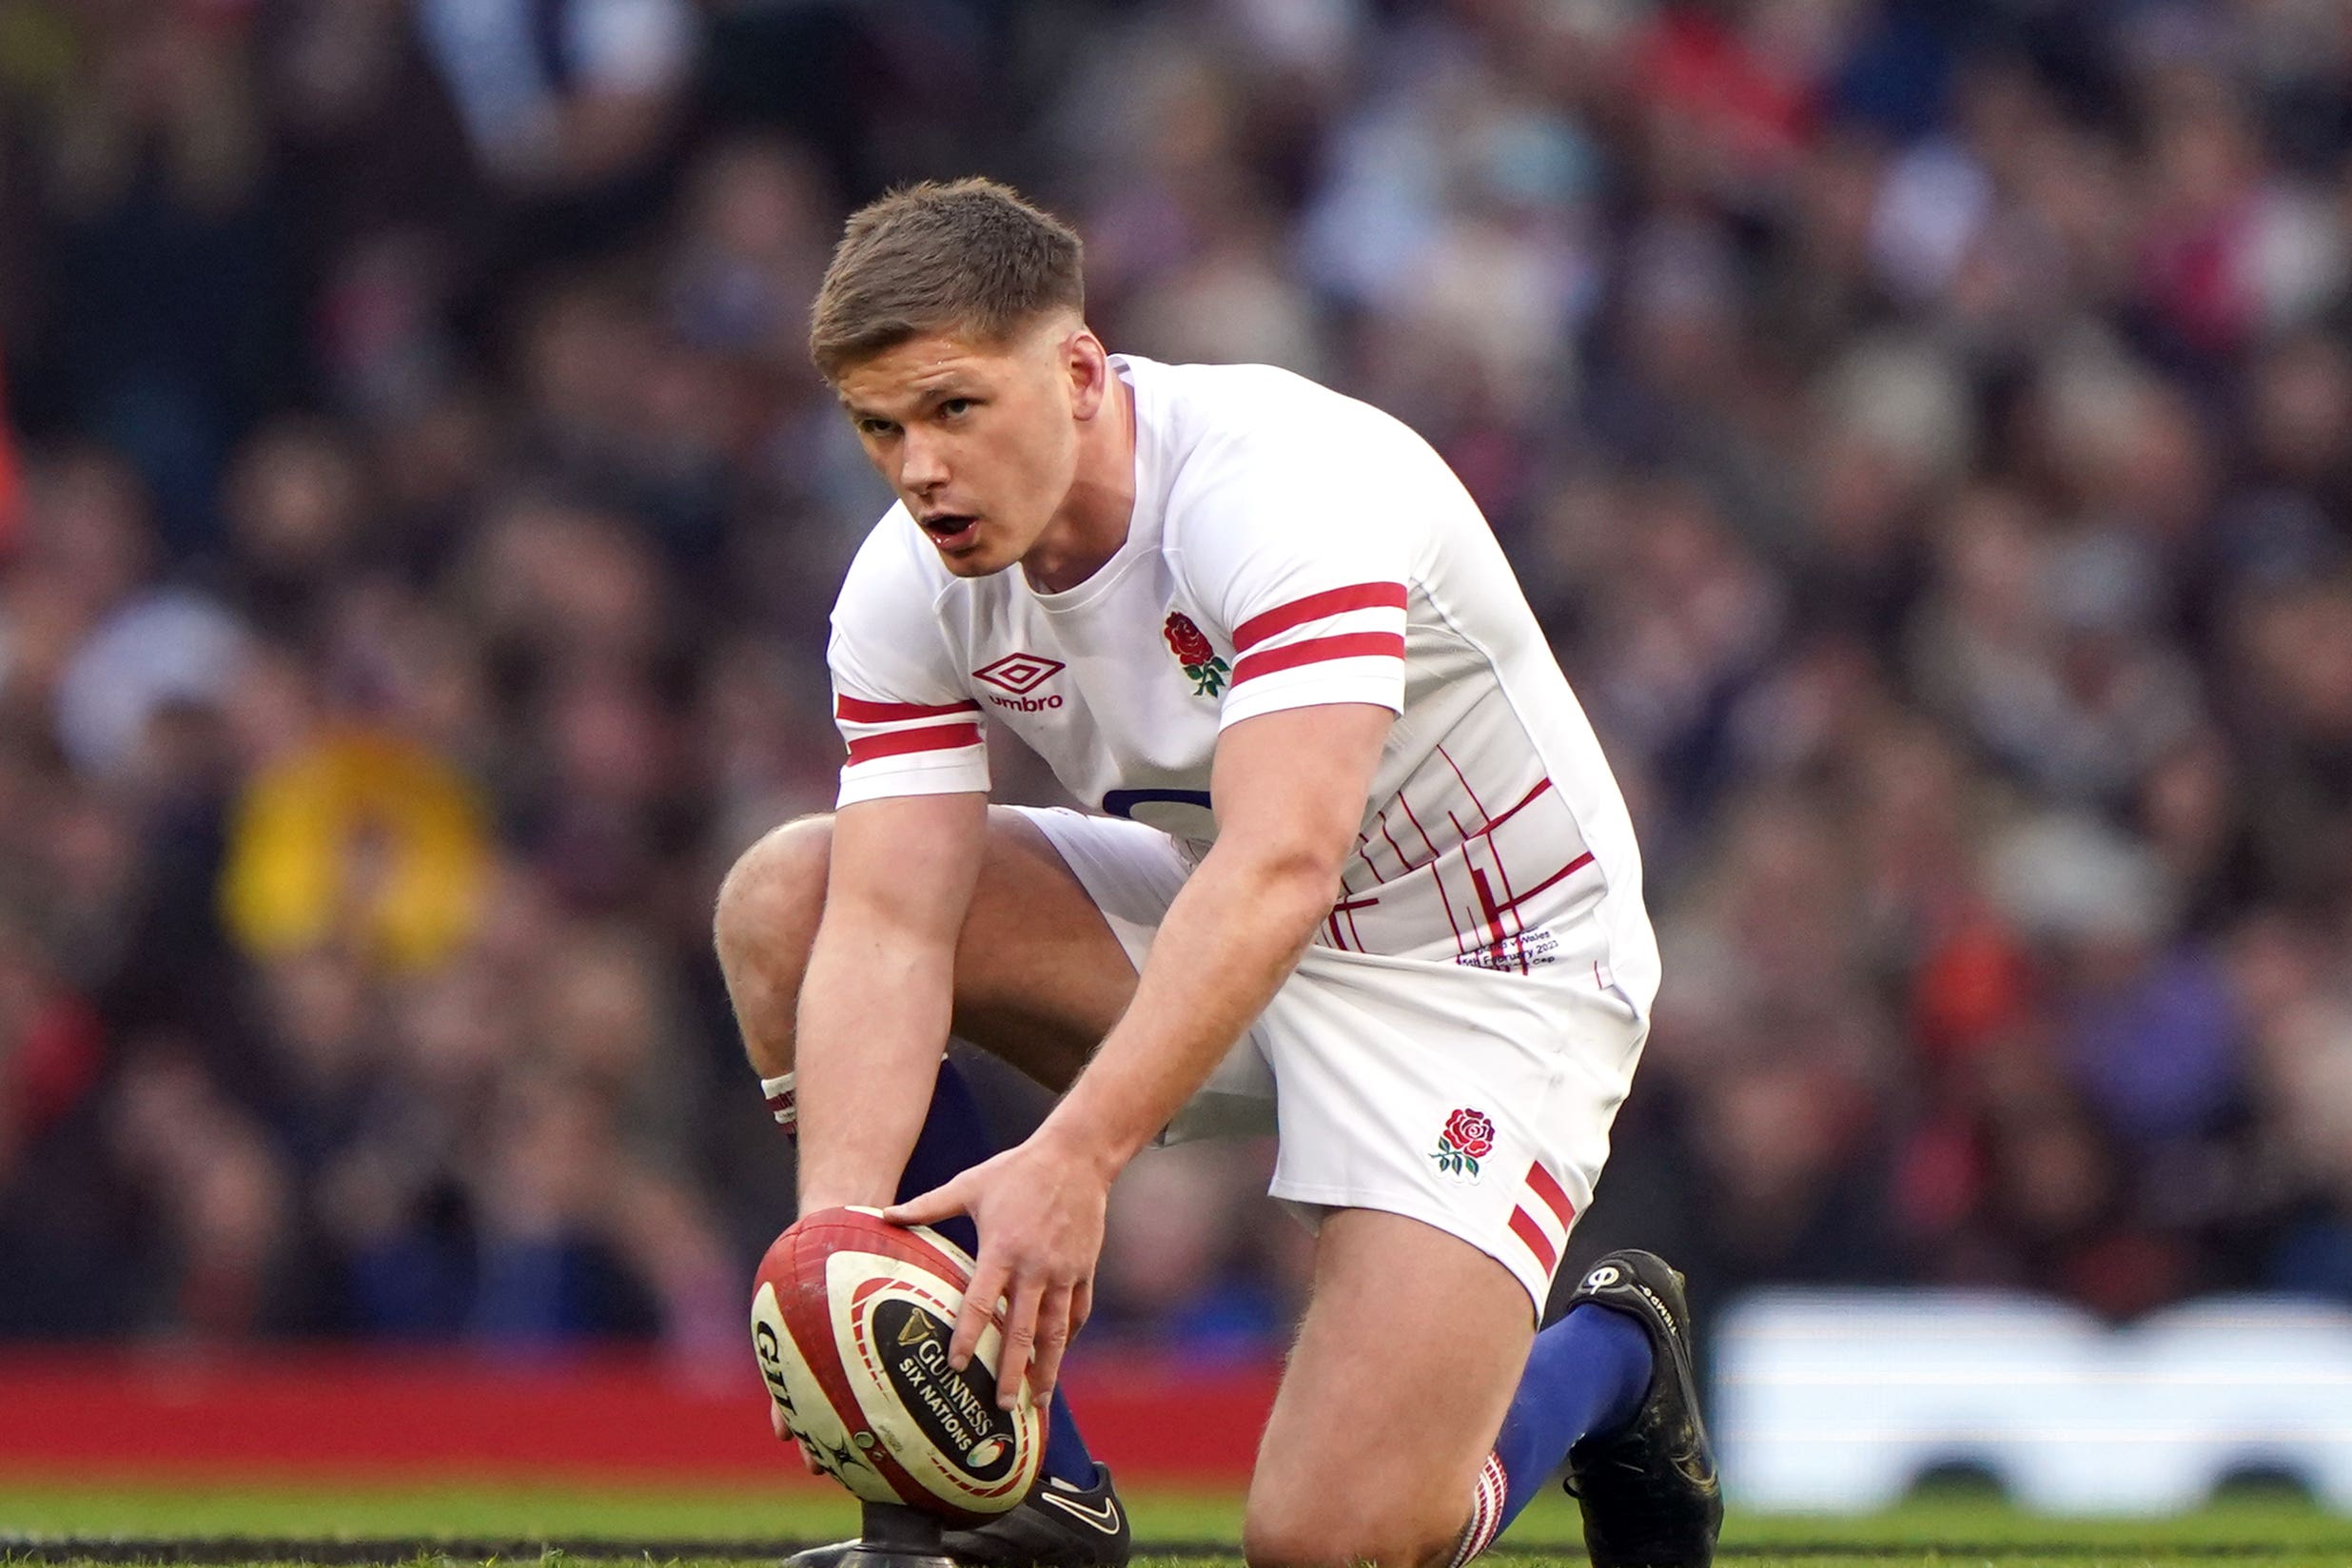 Owen Farrell has struggled from the tee so far this Six Nations